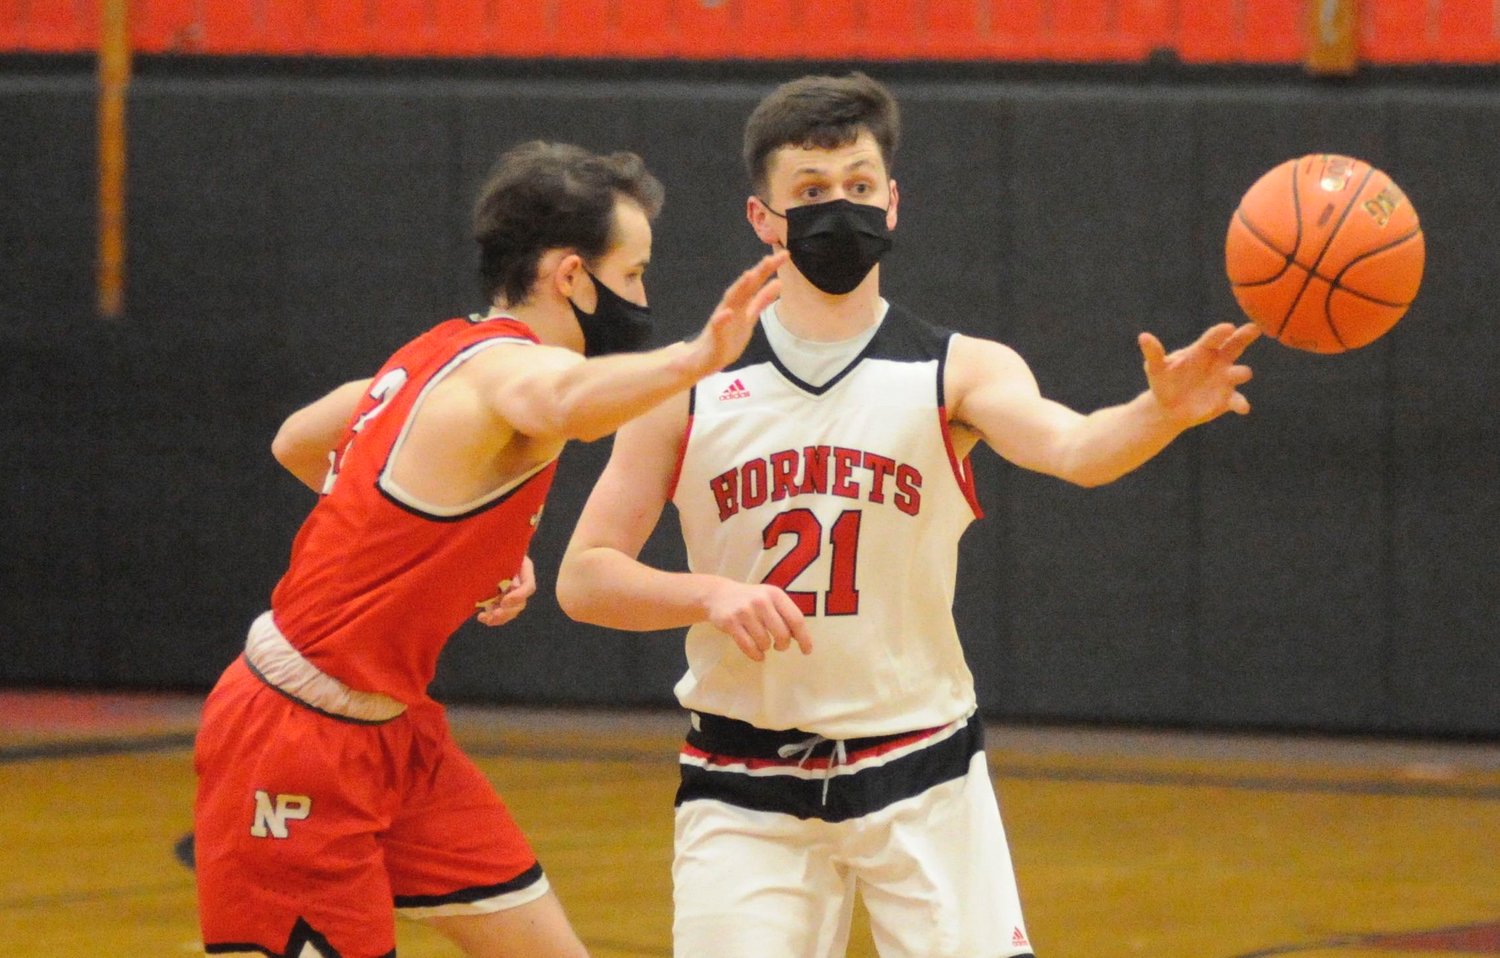 Flight of fancy. Honesdale’s Connor Coar passes off to a teammate as North Pocono’s Zack Walsh closes in. Walsh posted 12 points for the Trojans.